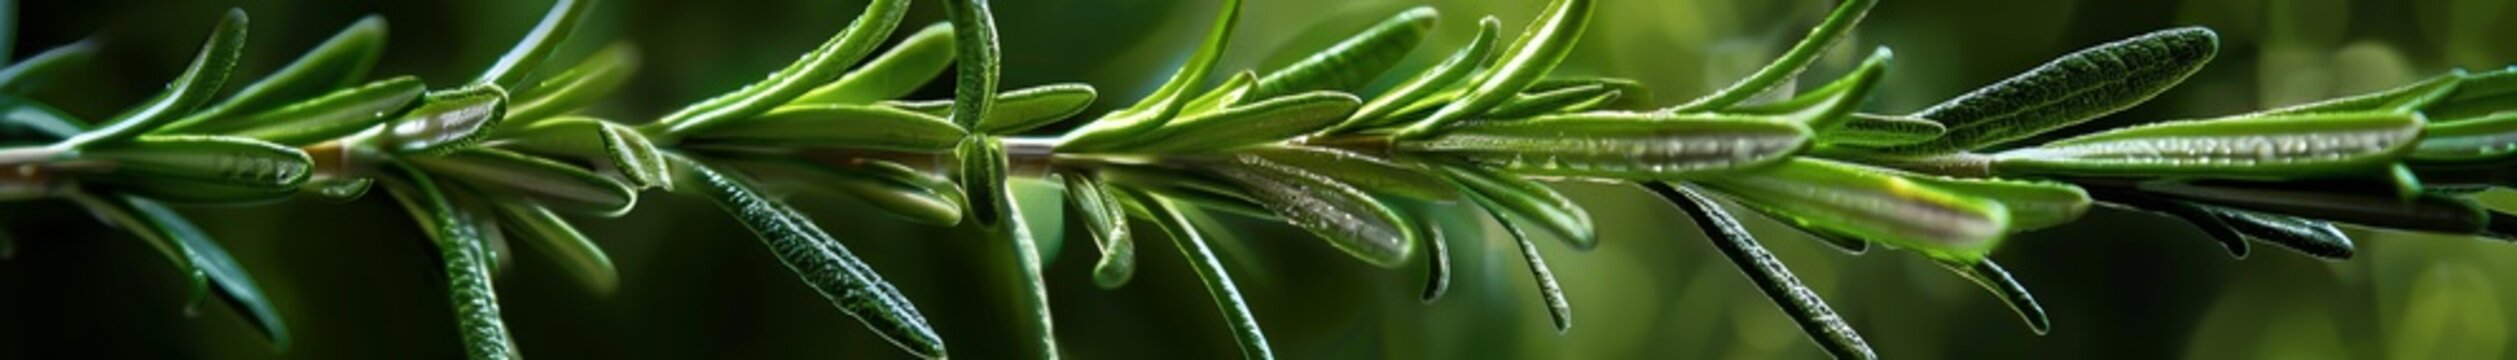 Rosemary sprig close up fine details and texture soft light on green